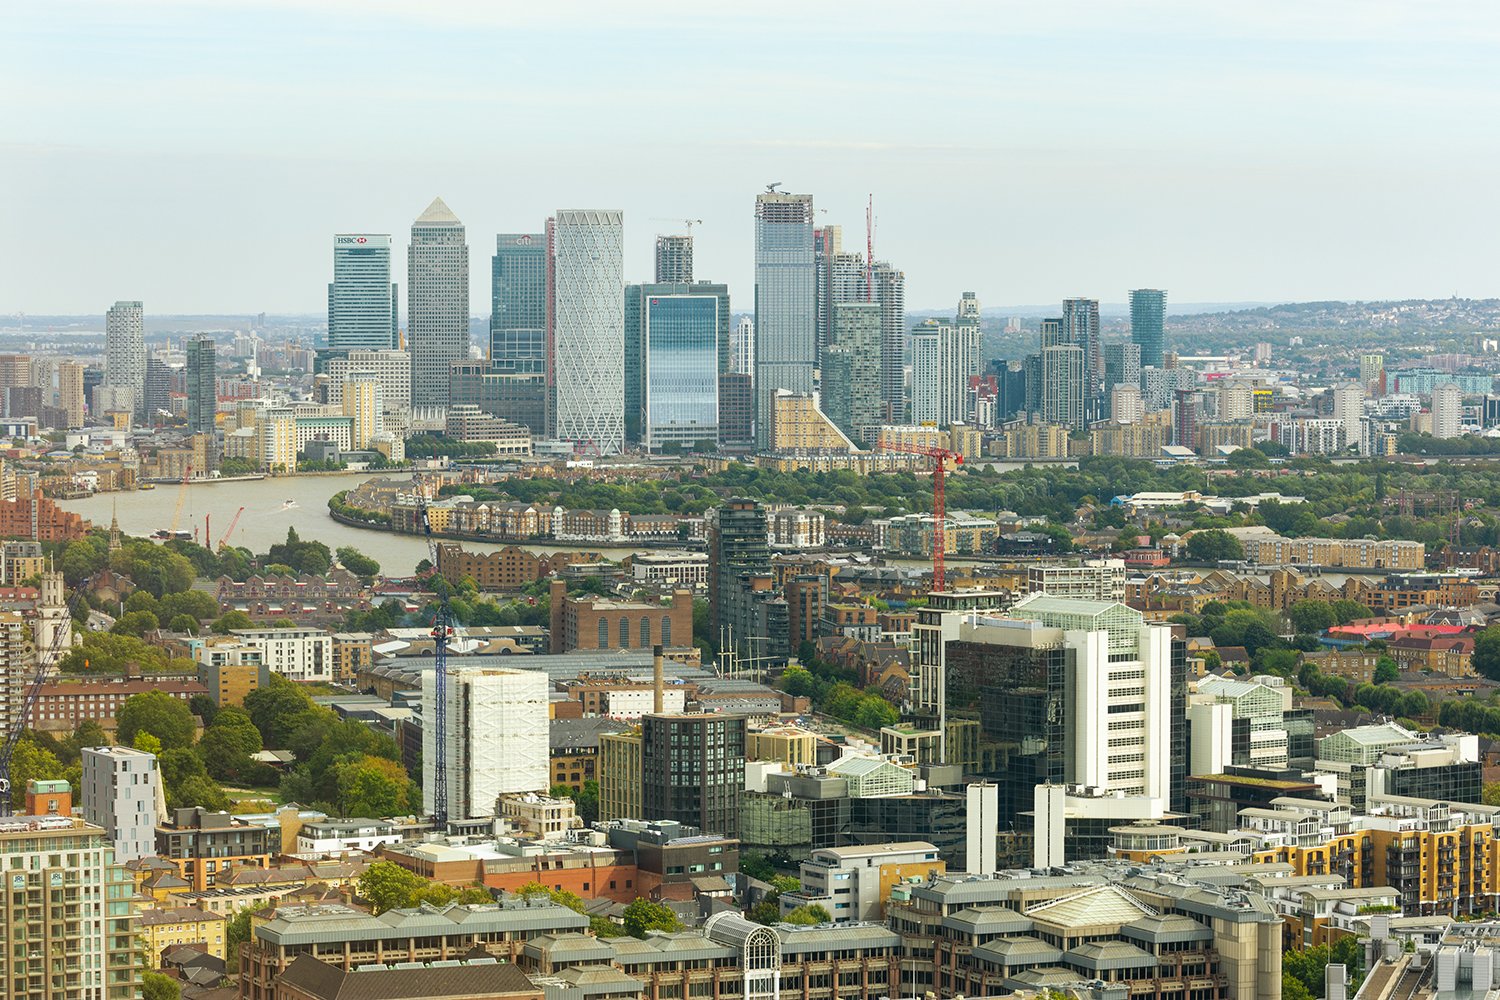 lee-mundy-0146-View-of-London-from-The-Sky-Garden-w1500px.jpg